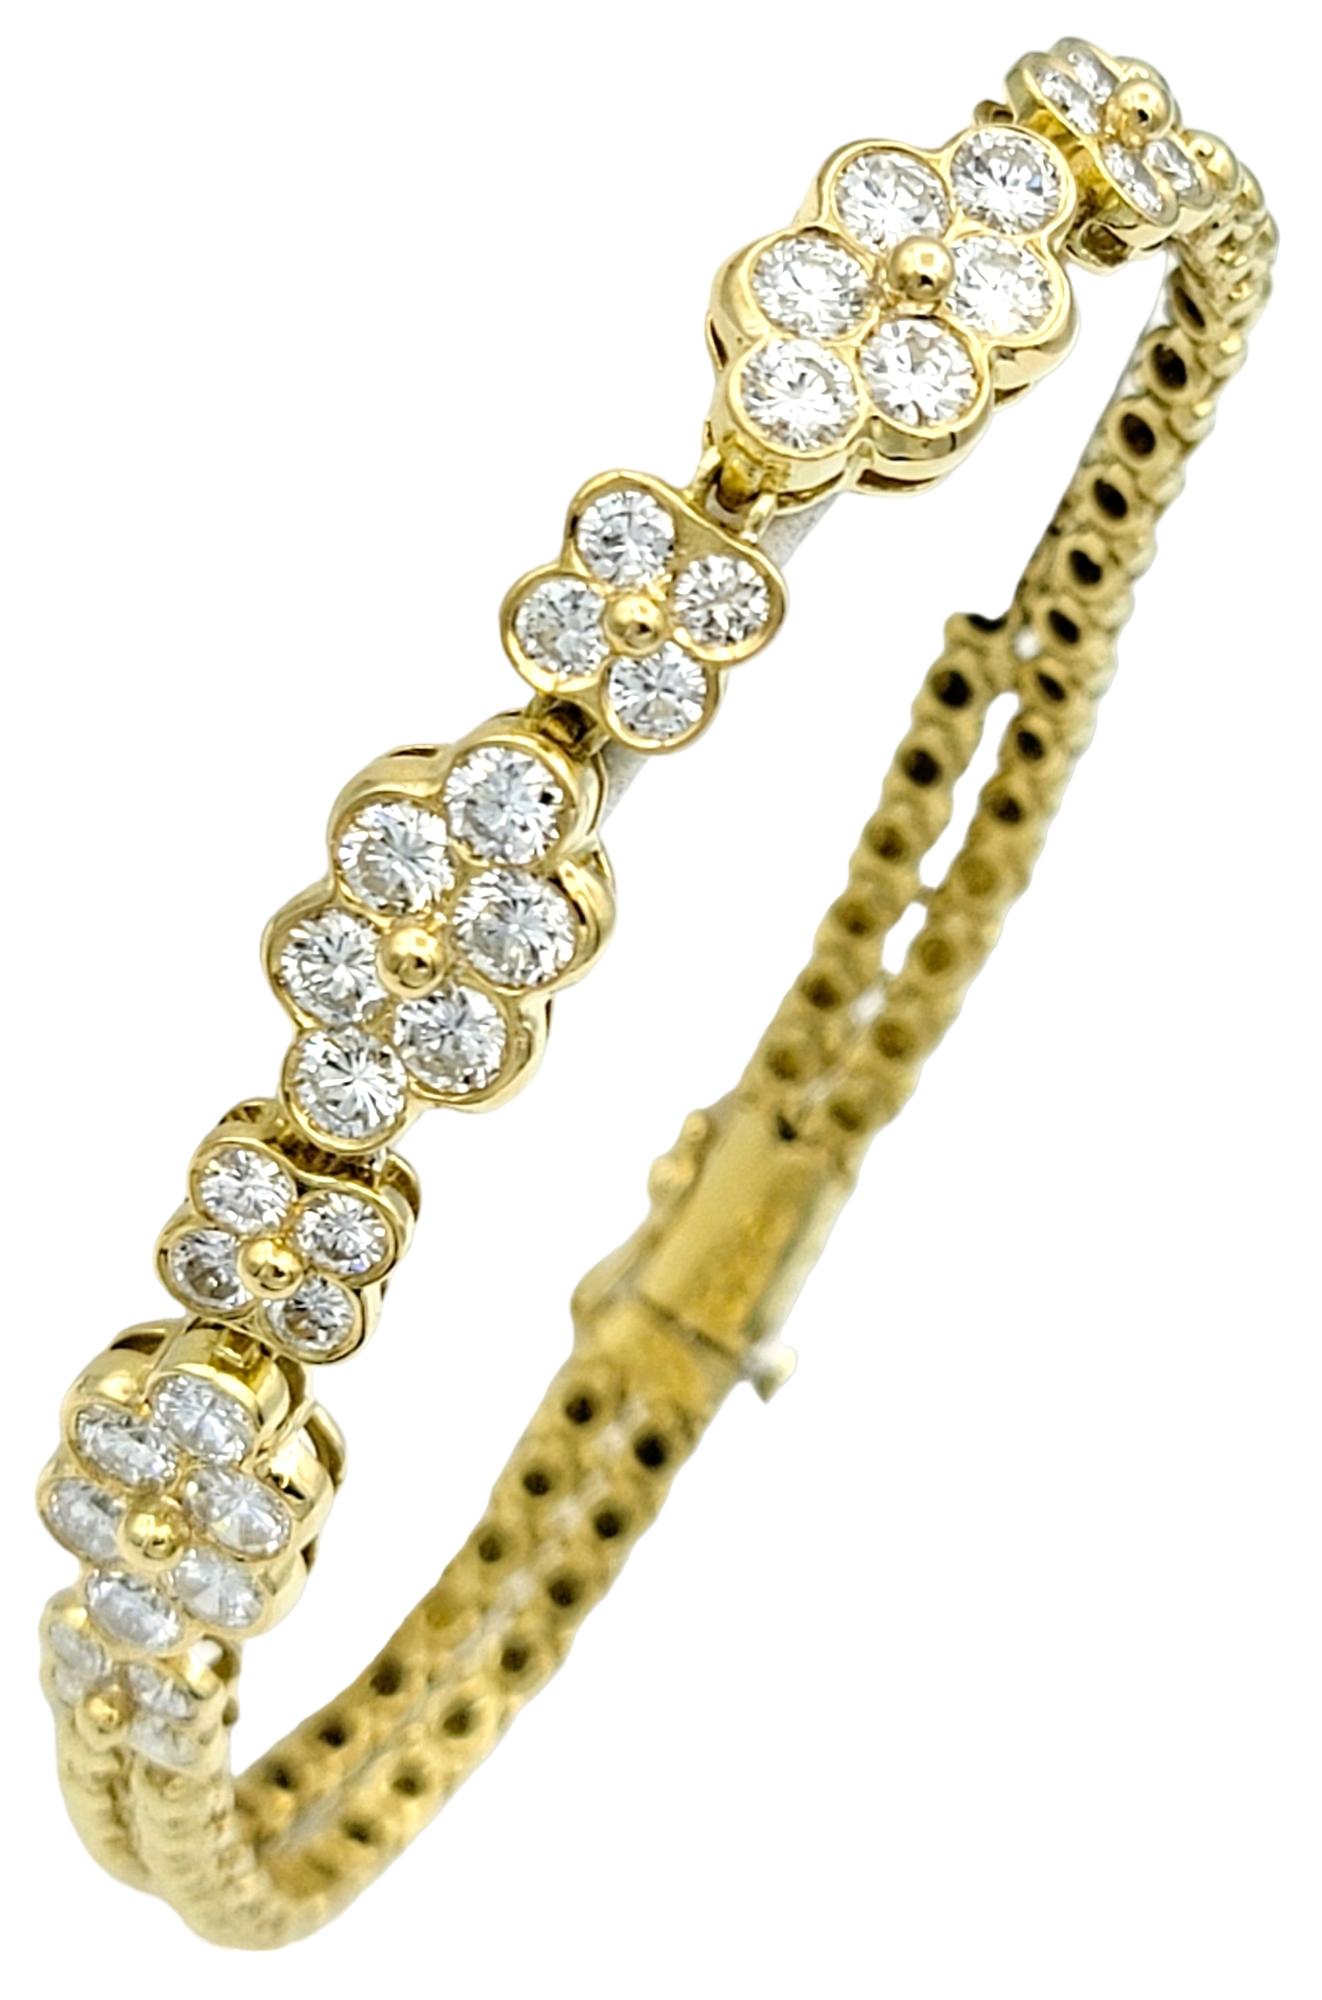 Contemporary 3.36 Carat Diamond Floral Double Row Bead Link Bracelet in 18 Karat Yellow Gold For Sale